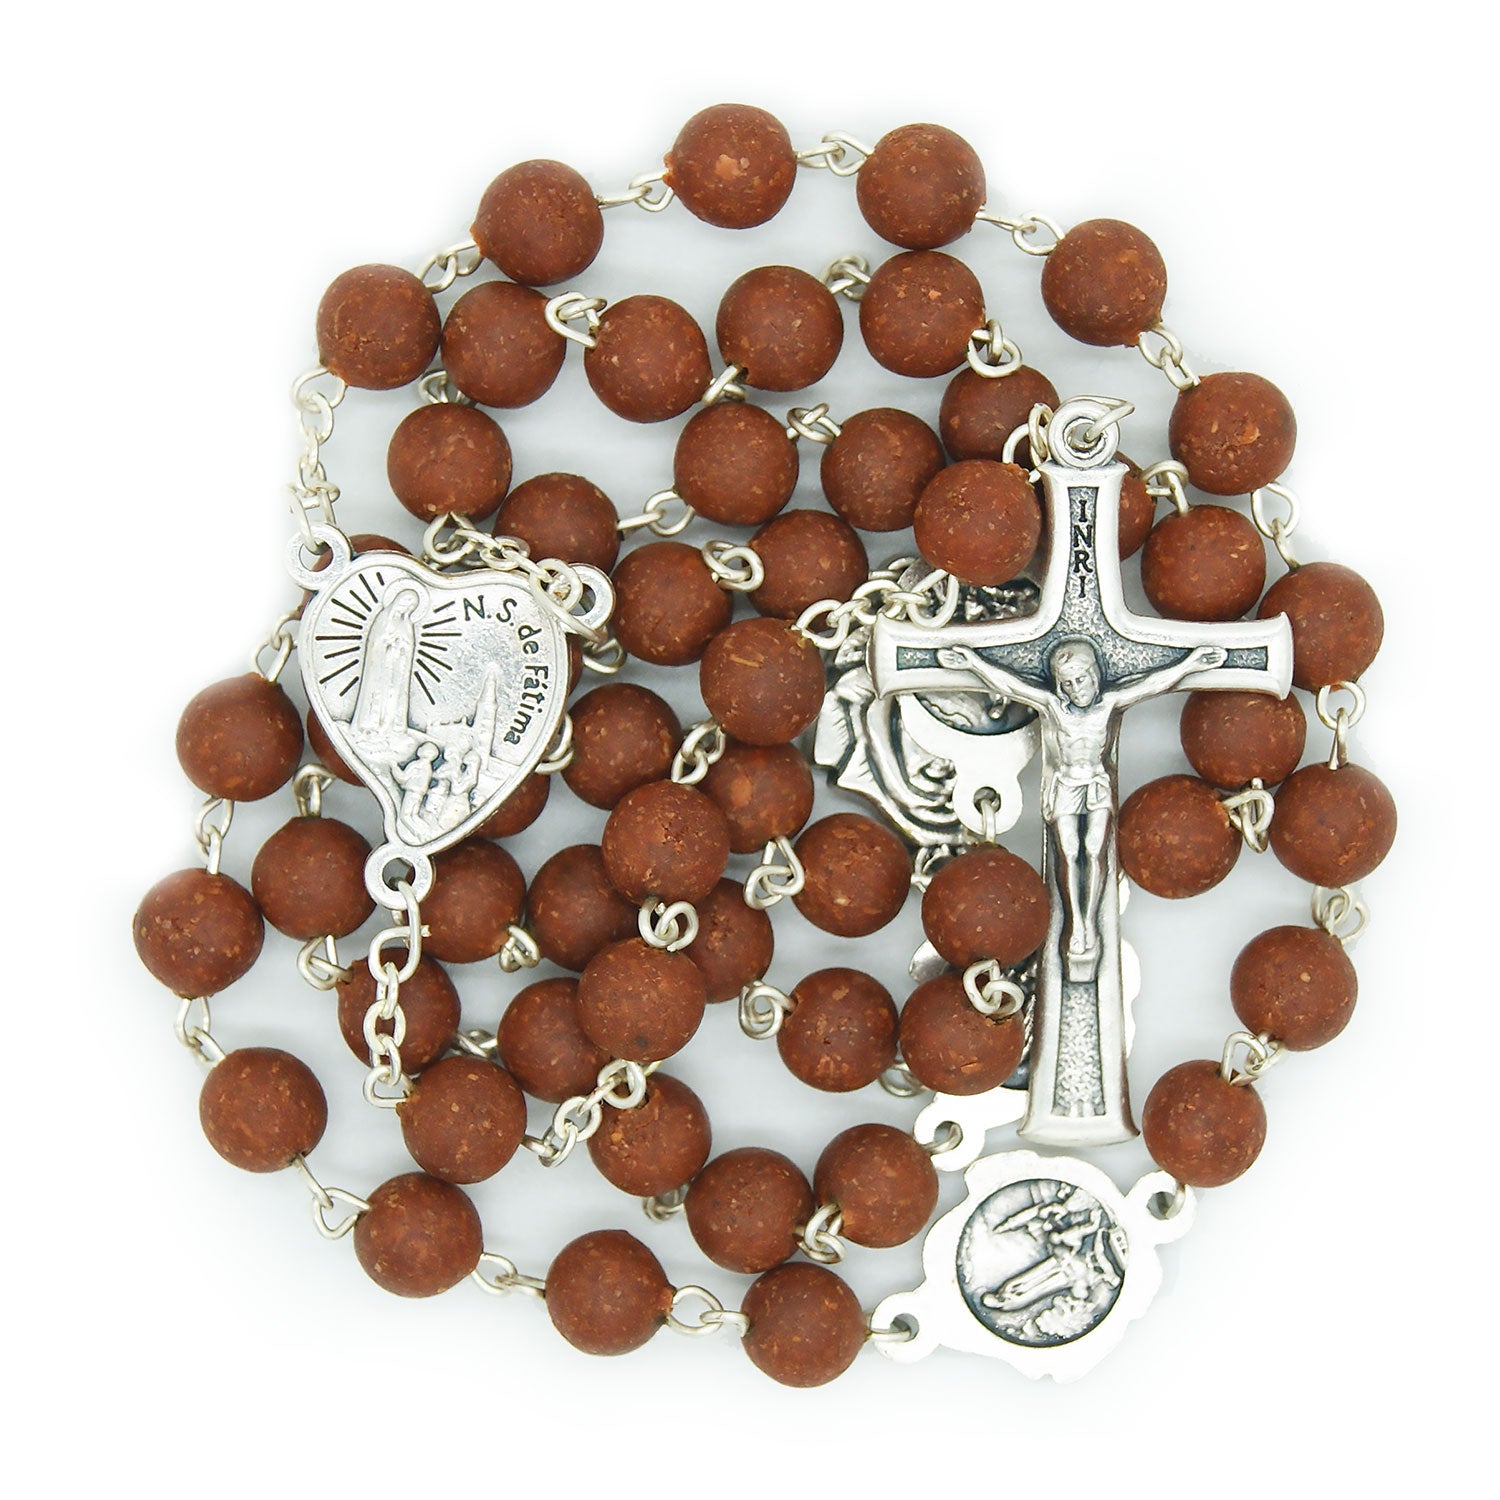 Catholic Handmade Scented Our Lady of Fatima Rose Petal Rosary Beads for Woman Made in Portugal